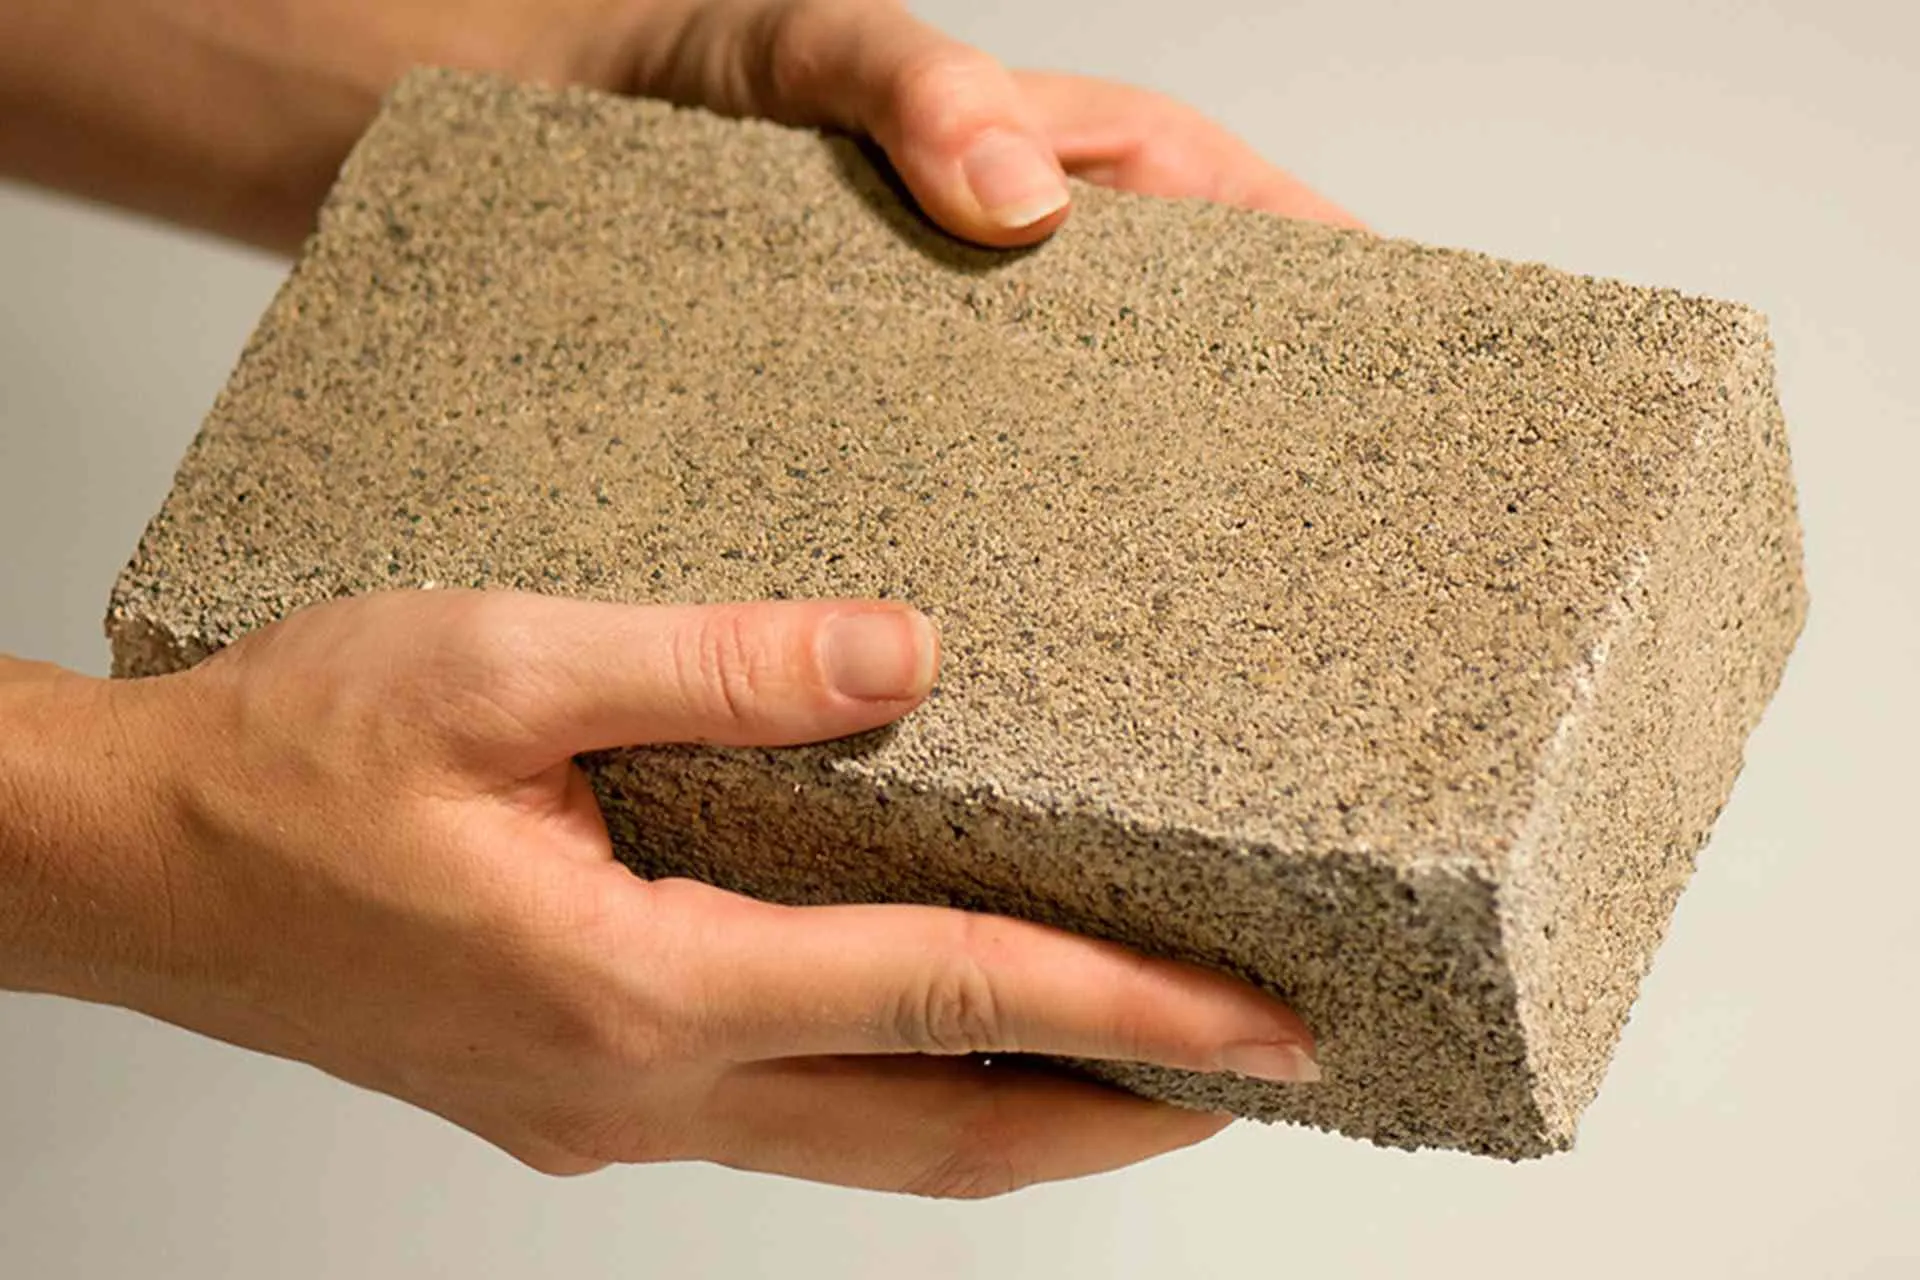 This brick is made from biocement material.